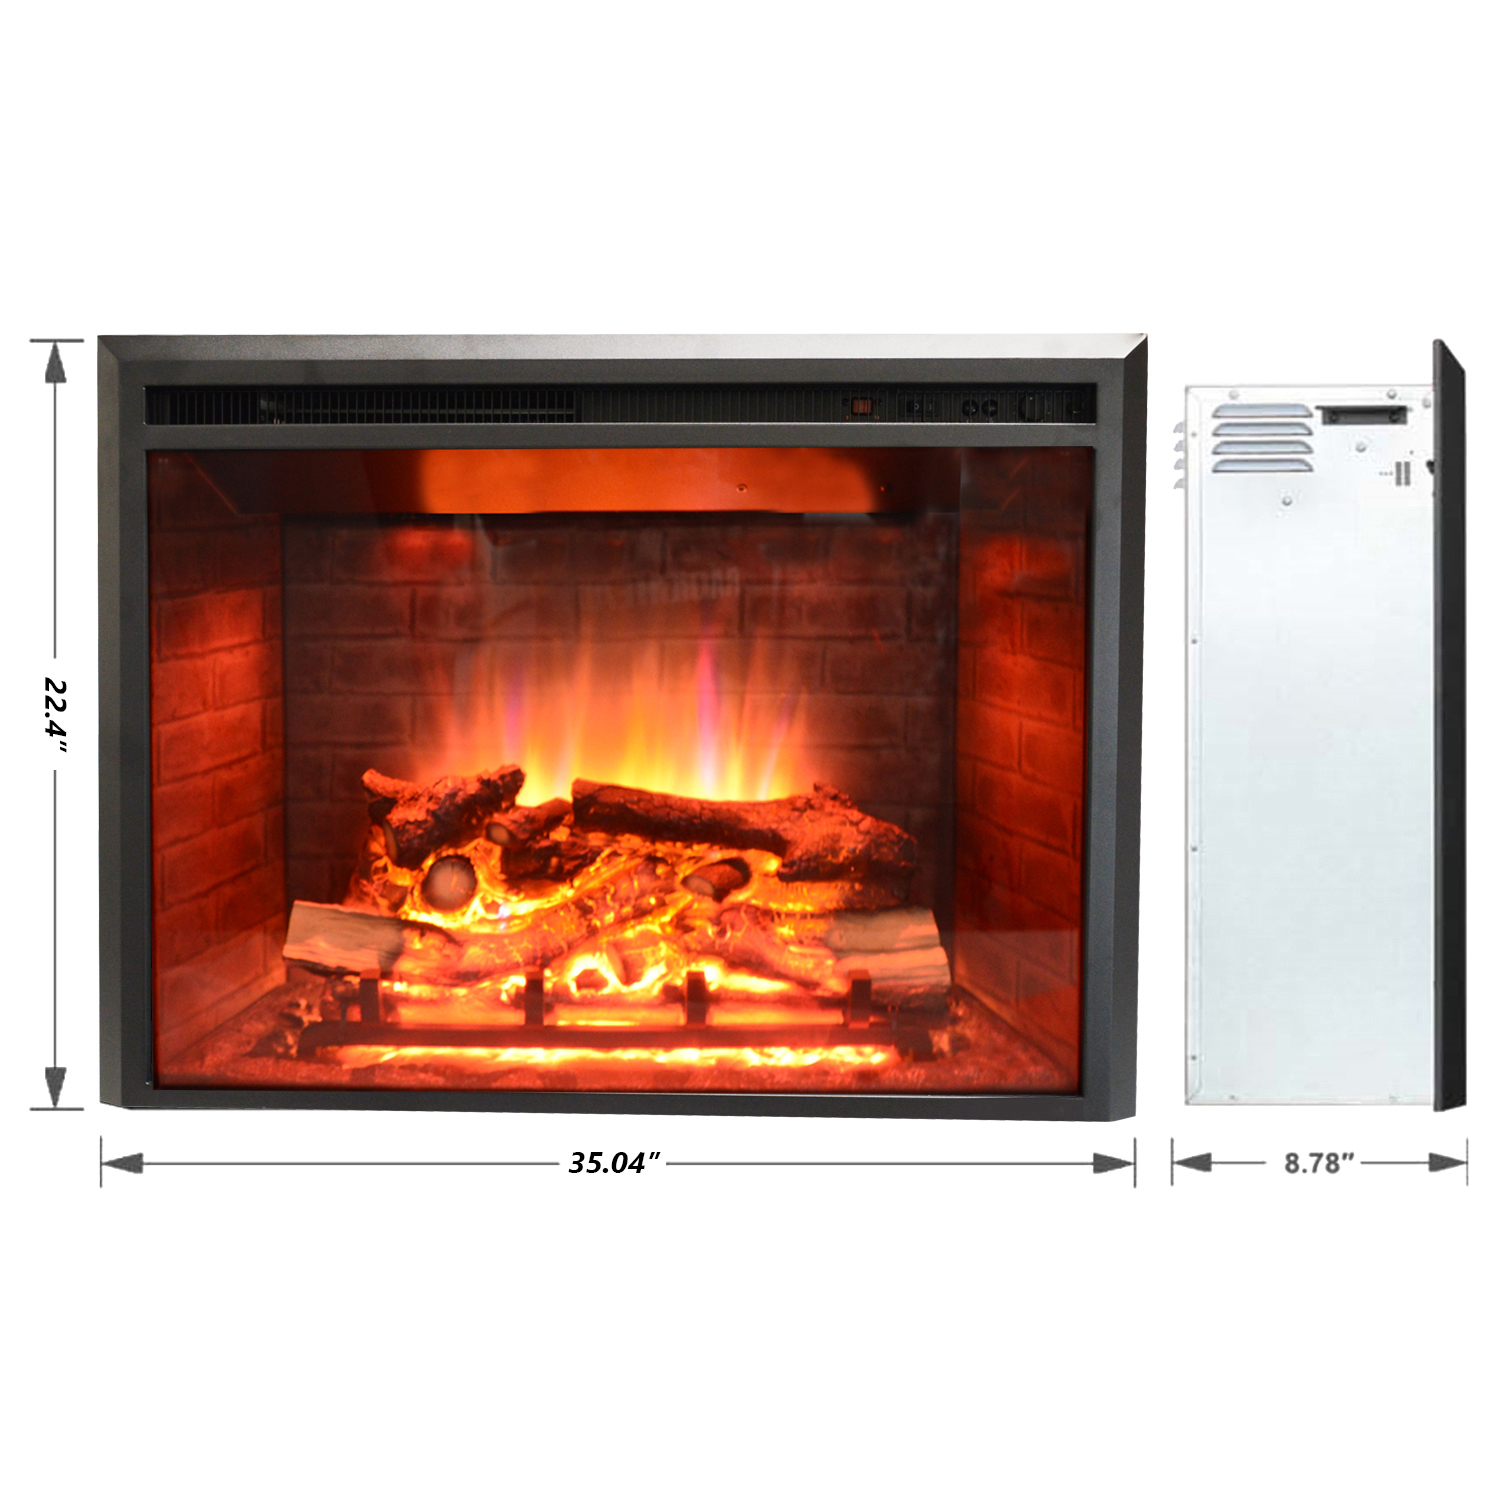 Altatac 33 inch Low Western Electric Fireplace Insert, Heater, Recessed Mounted - Black